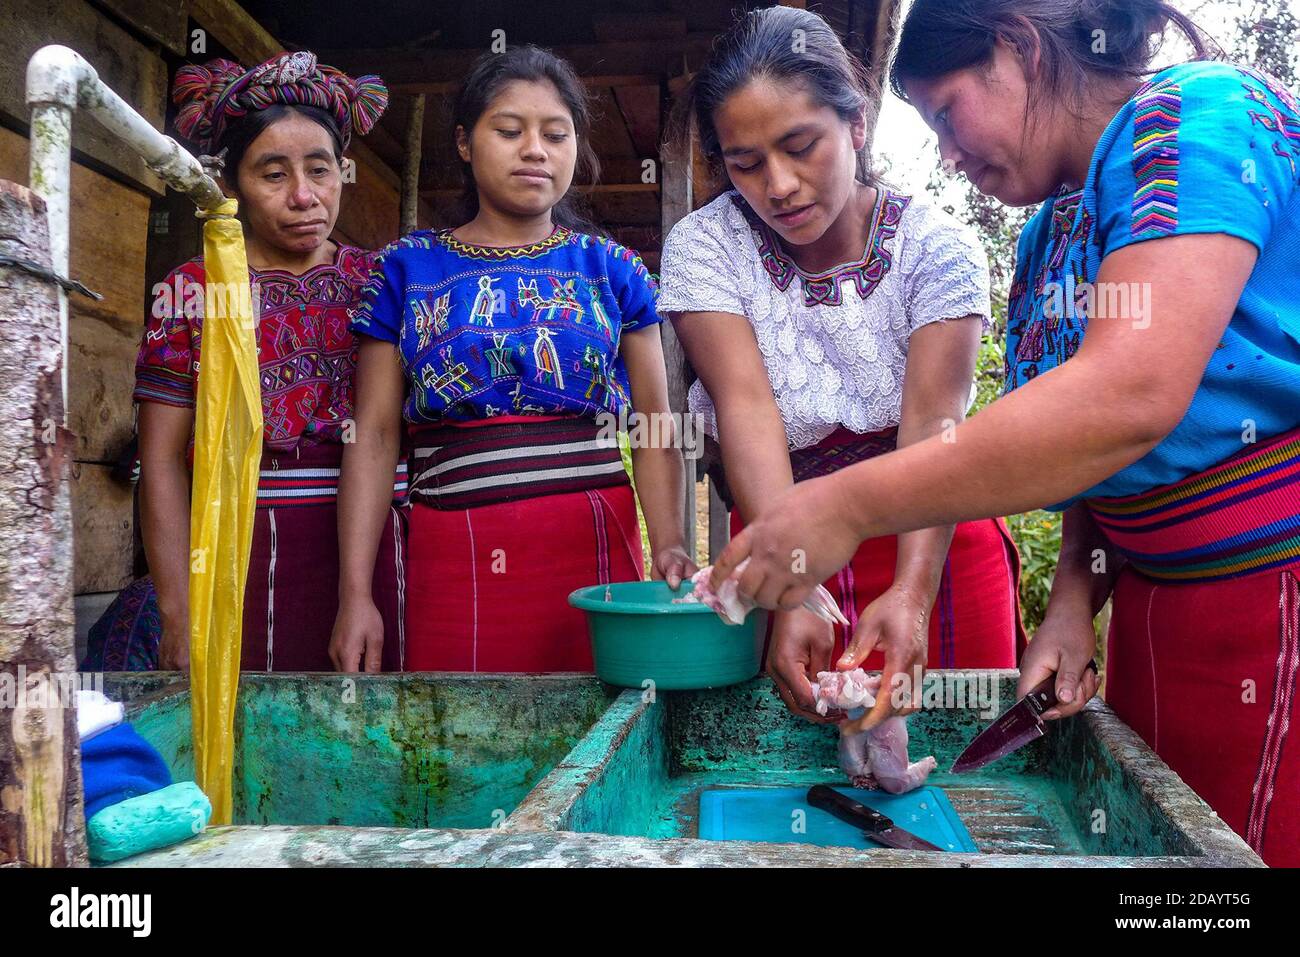 Left to right: Catarina Bernal, Margarita Ramírez, Catarina Cedillo, and Margarita Matom (CQ), all members of the Viucalvitz community, in Nebaj Quiché, Guatemala (CQ LINK), clean and prepare rabbit meat as a group to teach, learn, and improve the preperation of this Feando de Conejo dish. Their goal is to learn and share how to cook this healthy meal that takes advantage of the community’s resources. (Brenda Leticia Saloj Chiyal, GPJ Guatemala) Stock Photo